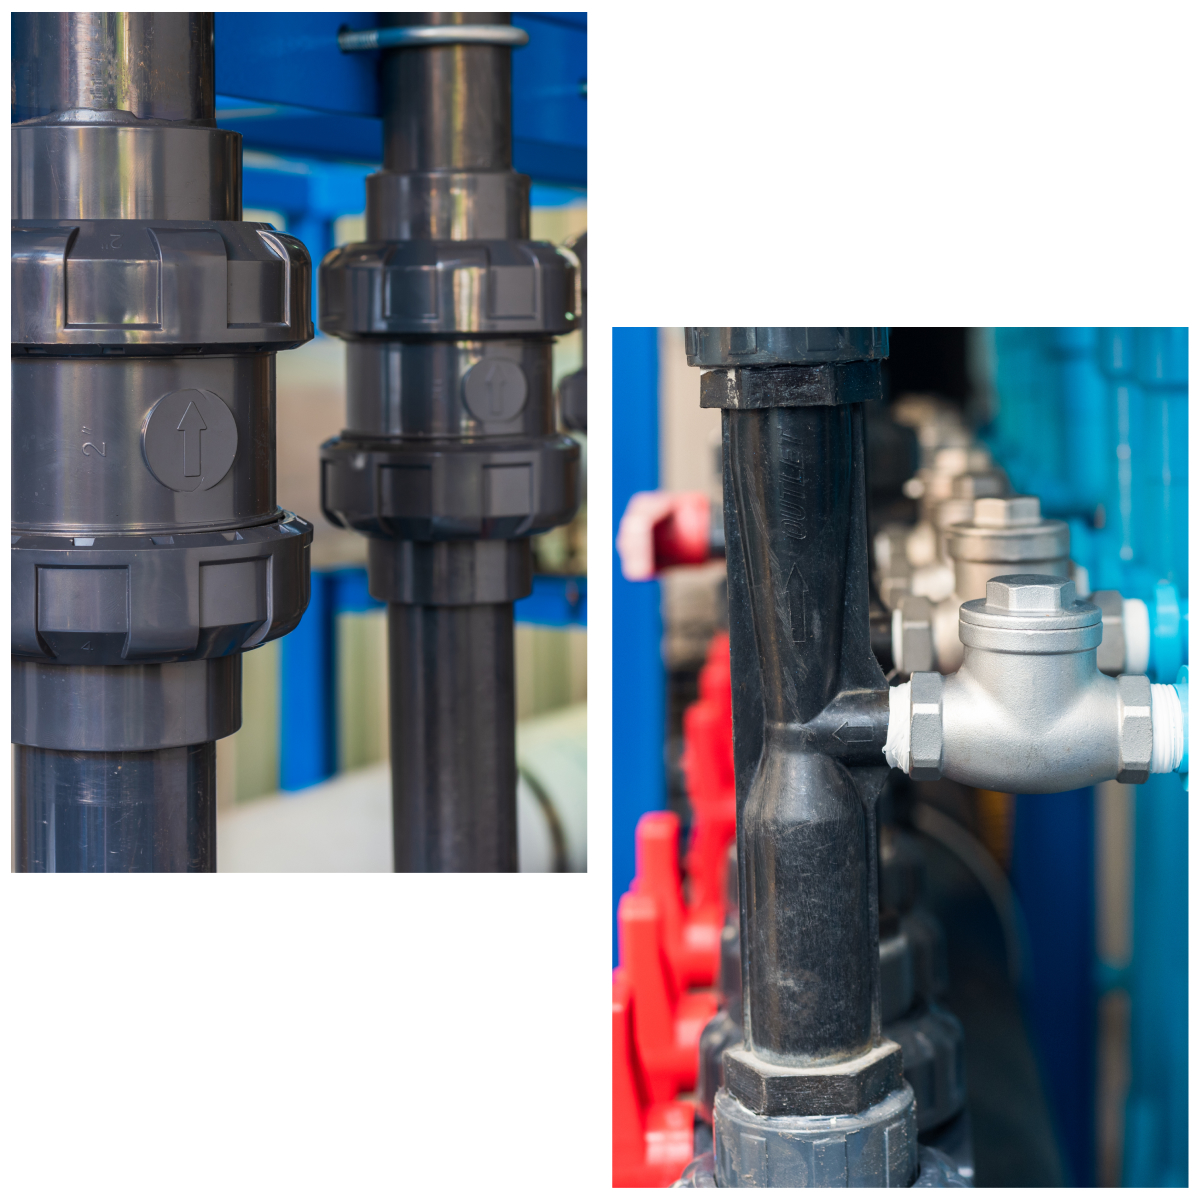 A collage image of industrial check valves.